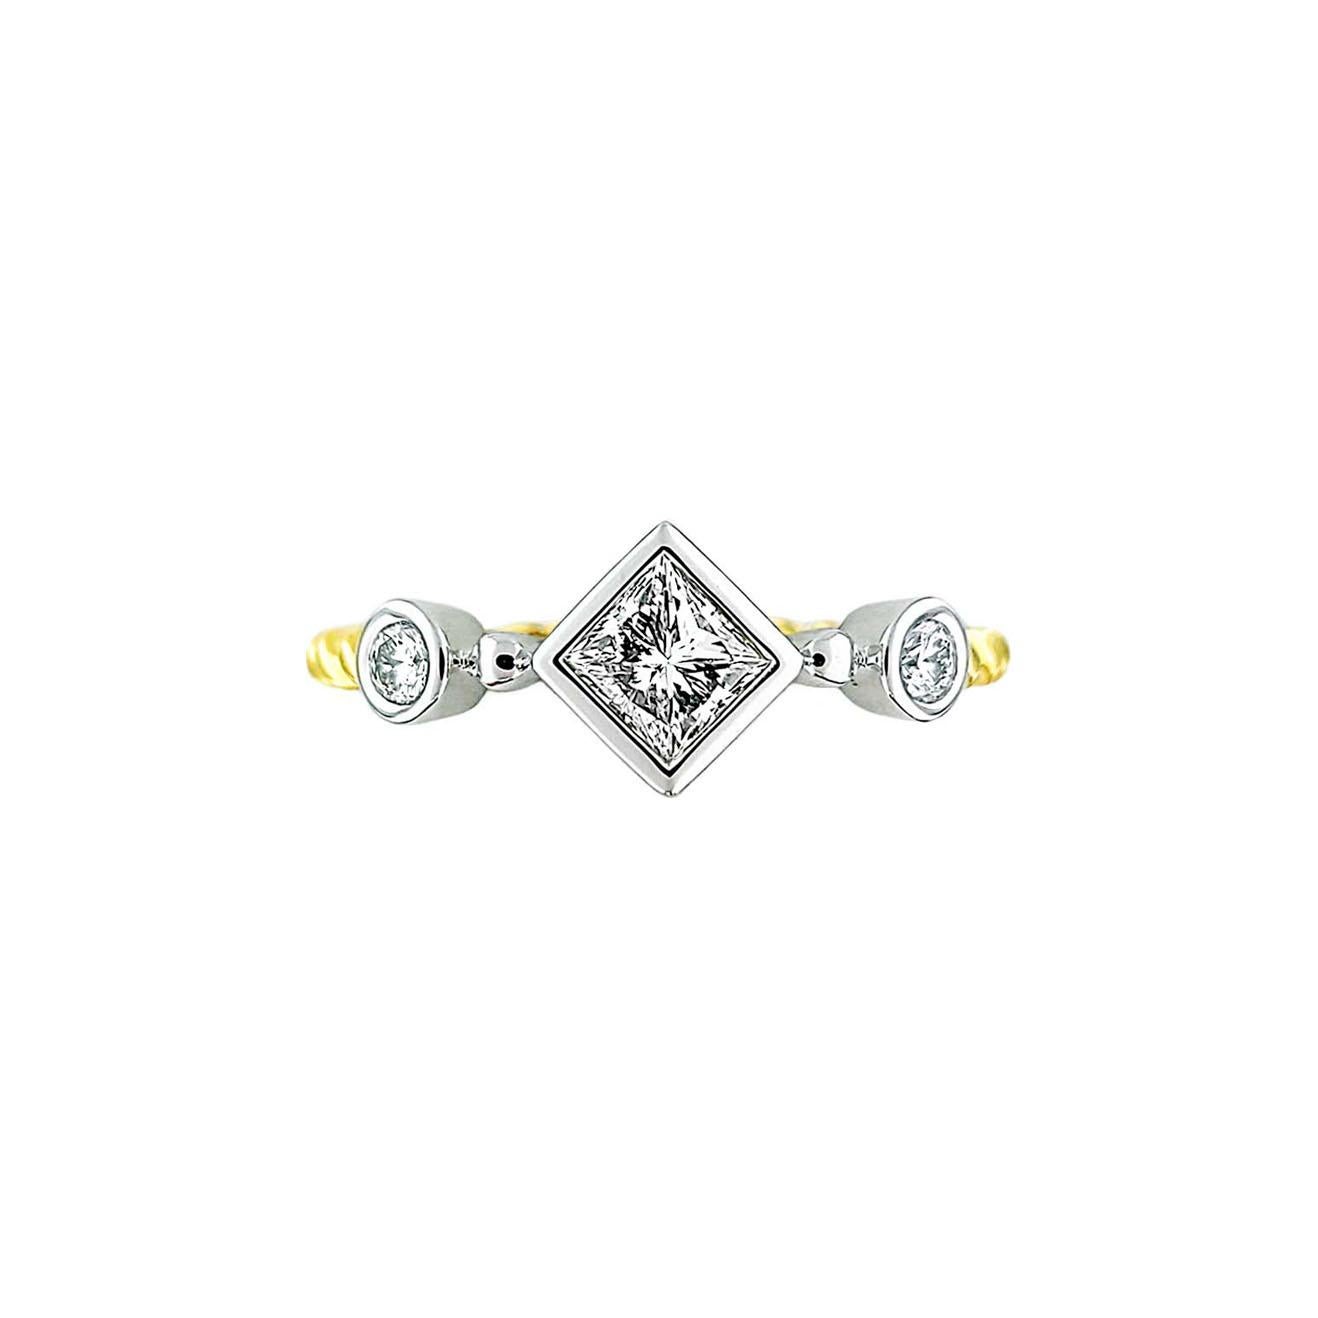 Produced by award winning Italian designer Stefano Vitolo. Stefano creates custom artisanal one of a kind jewelry with excellent gemstones in a truly old world Italian craftmanship.
This handcrafted ring has 0.34 carat princess cut diamond and melee